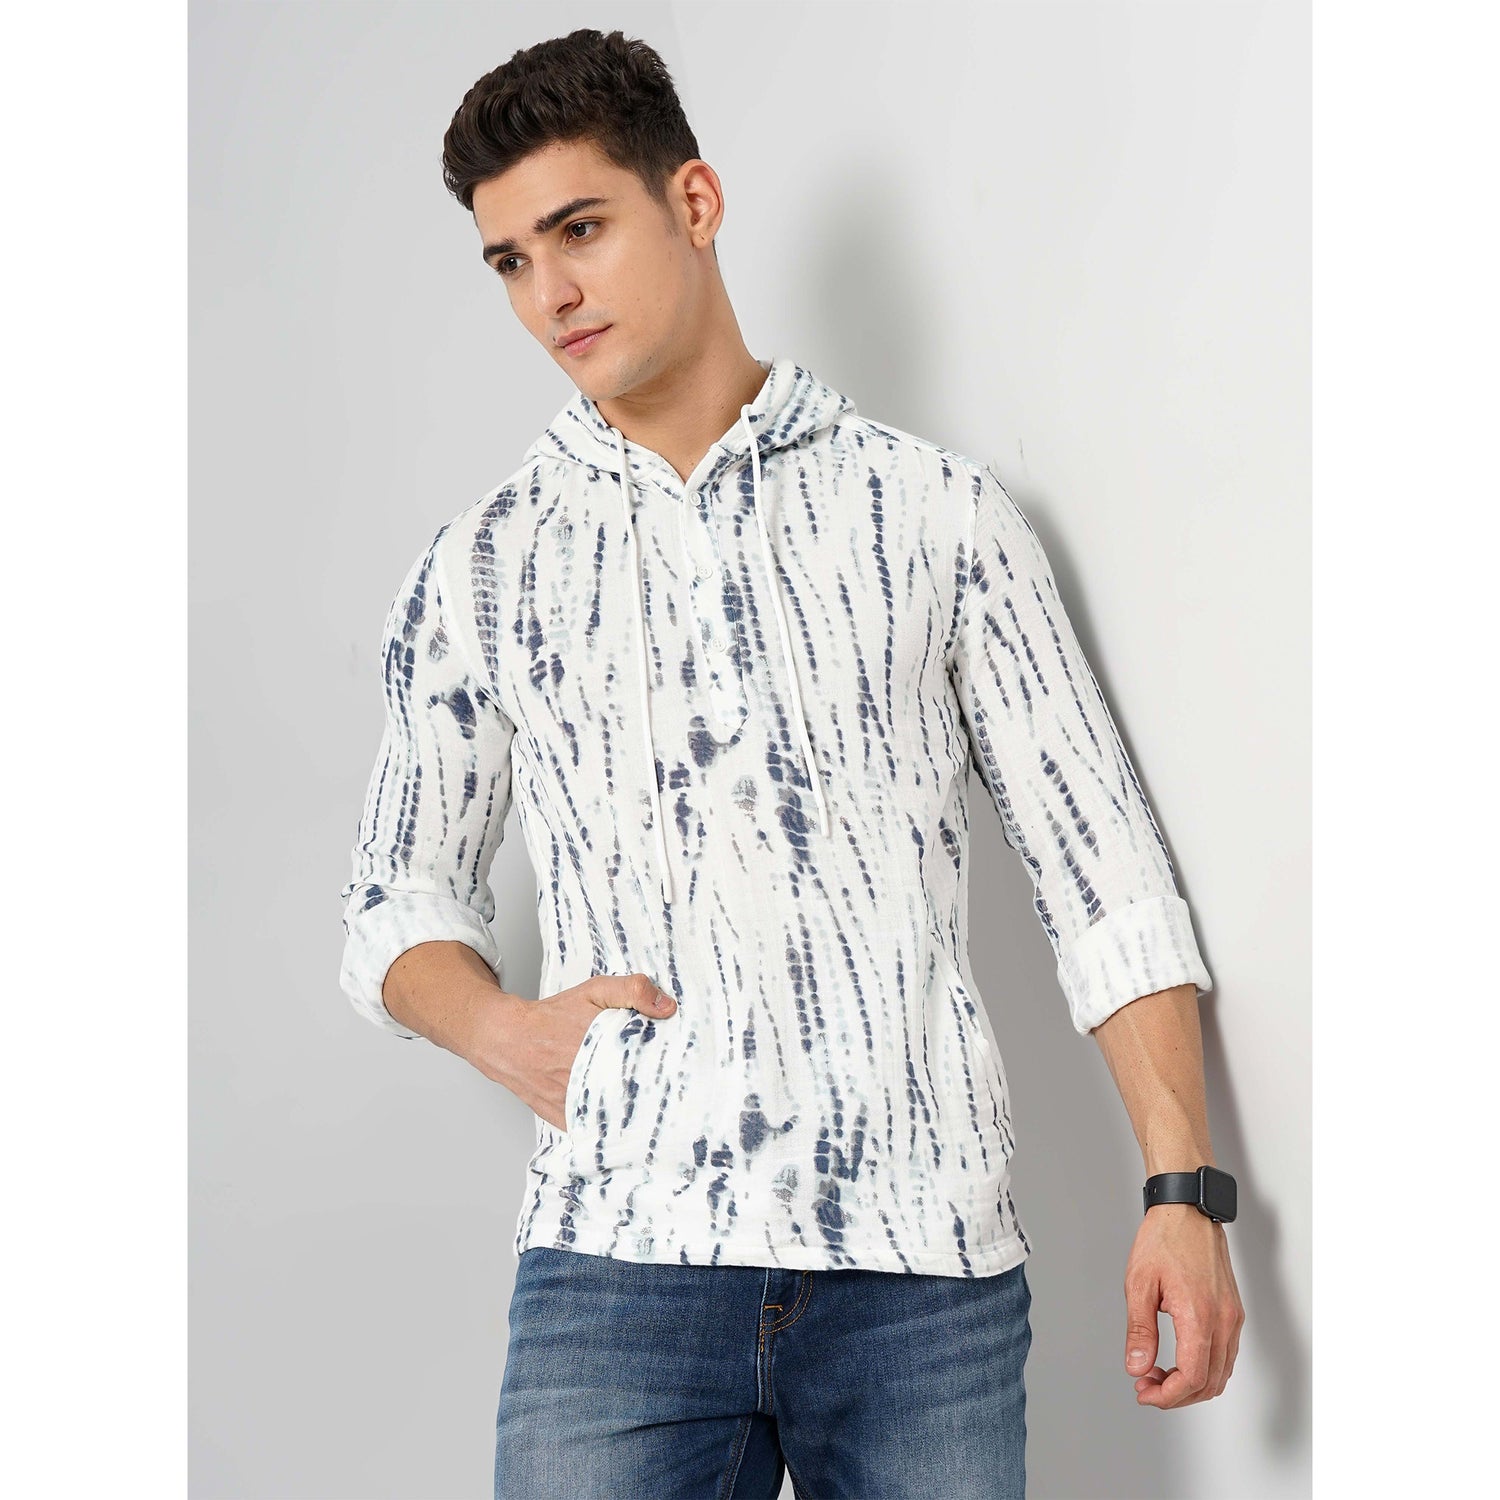 Abstract White Cotton Shirt (FAHOODTIE)